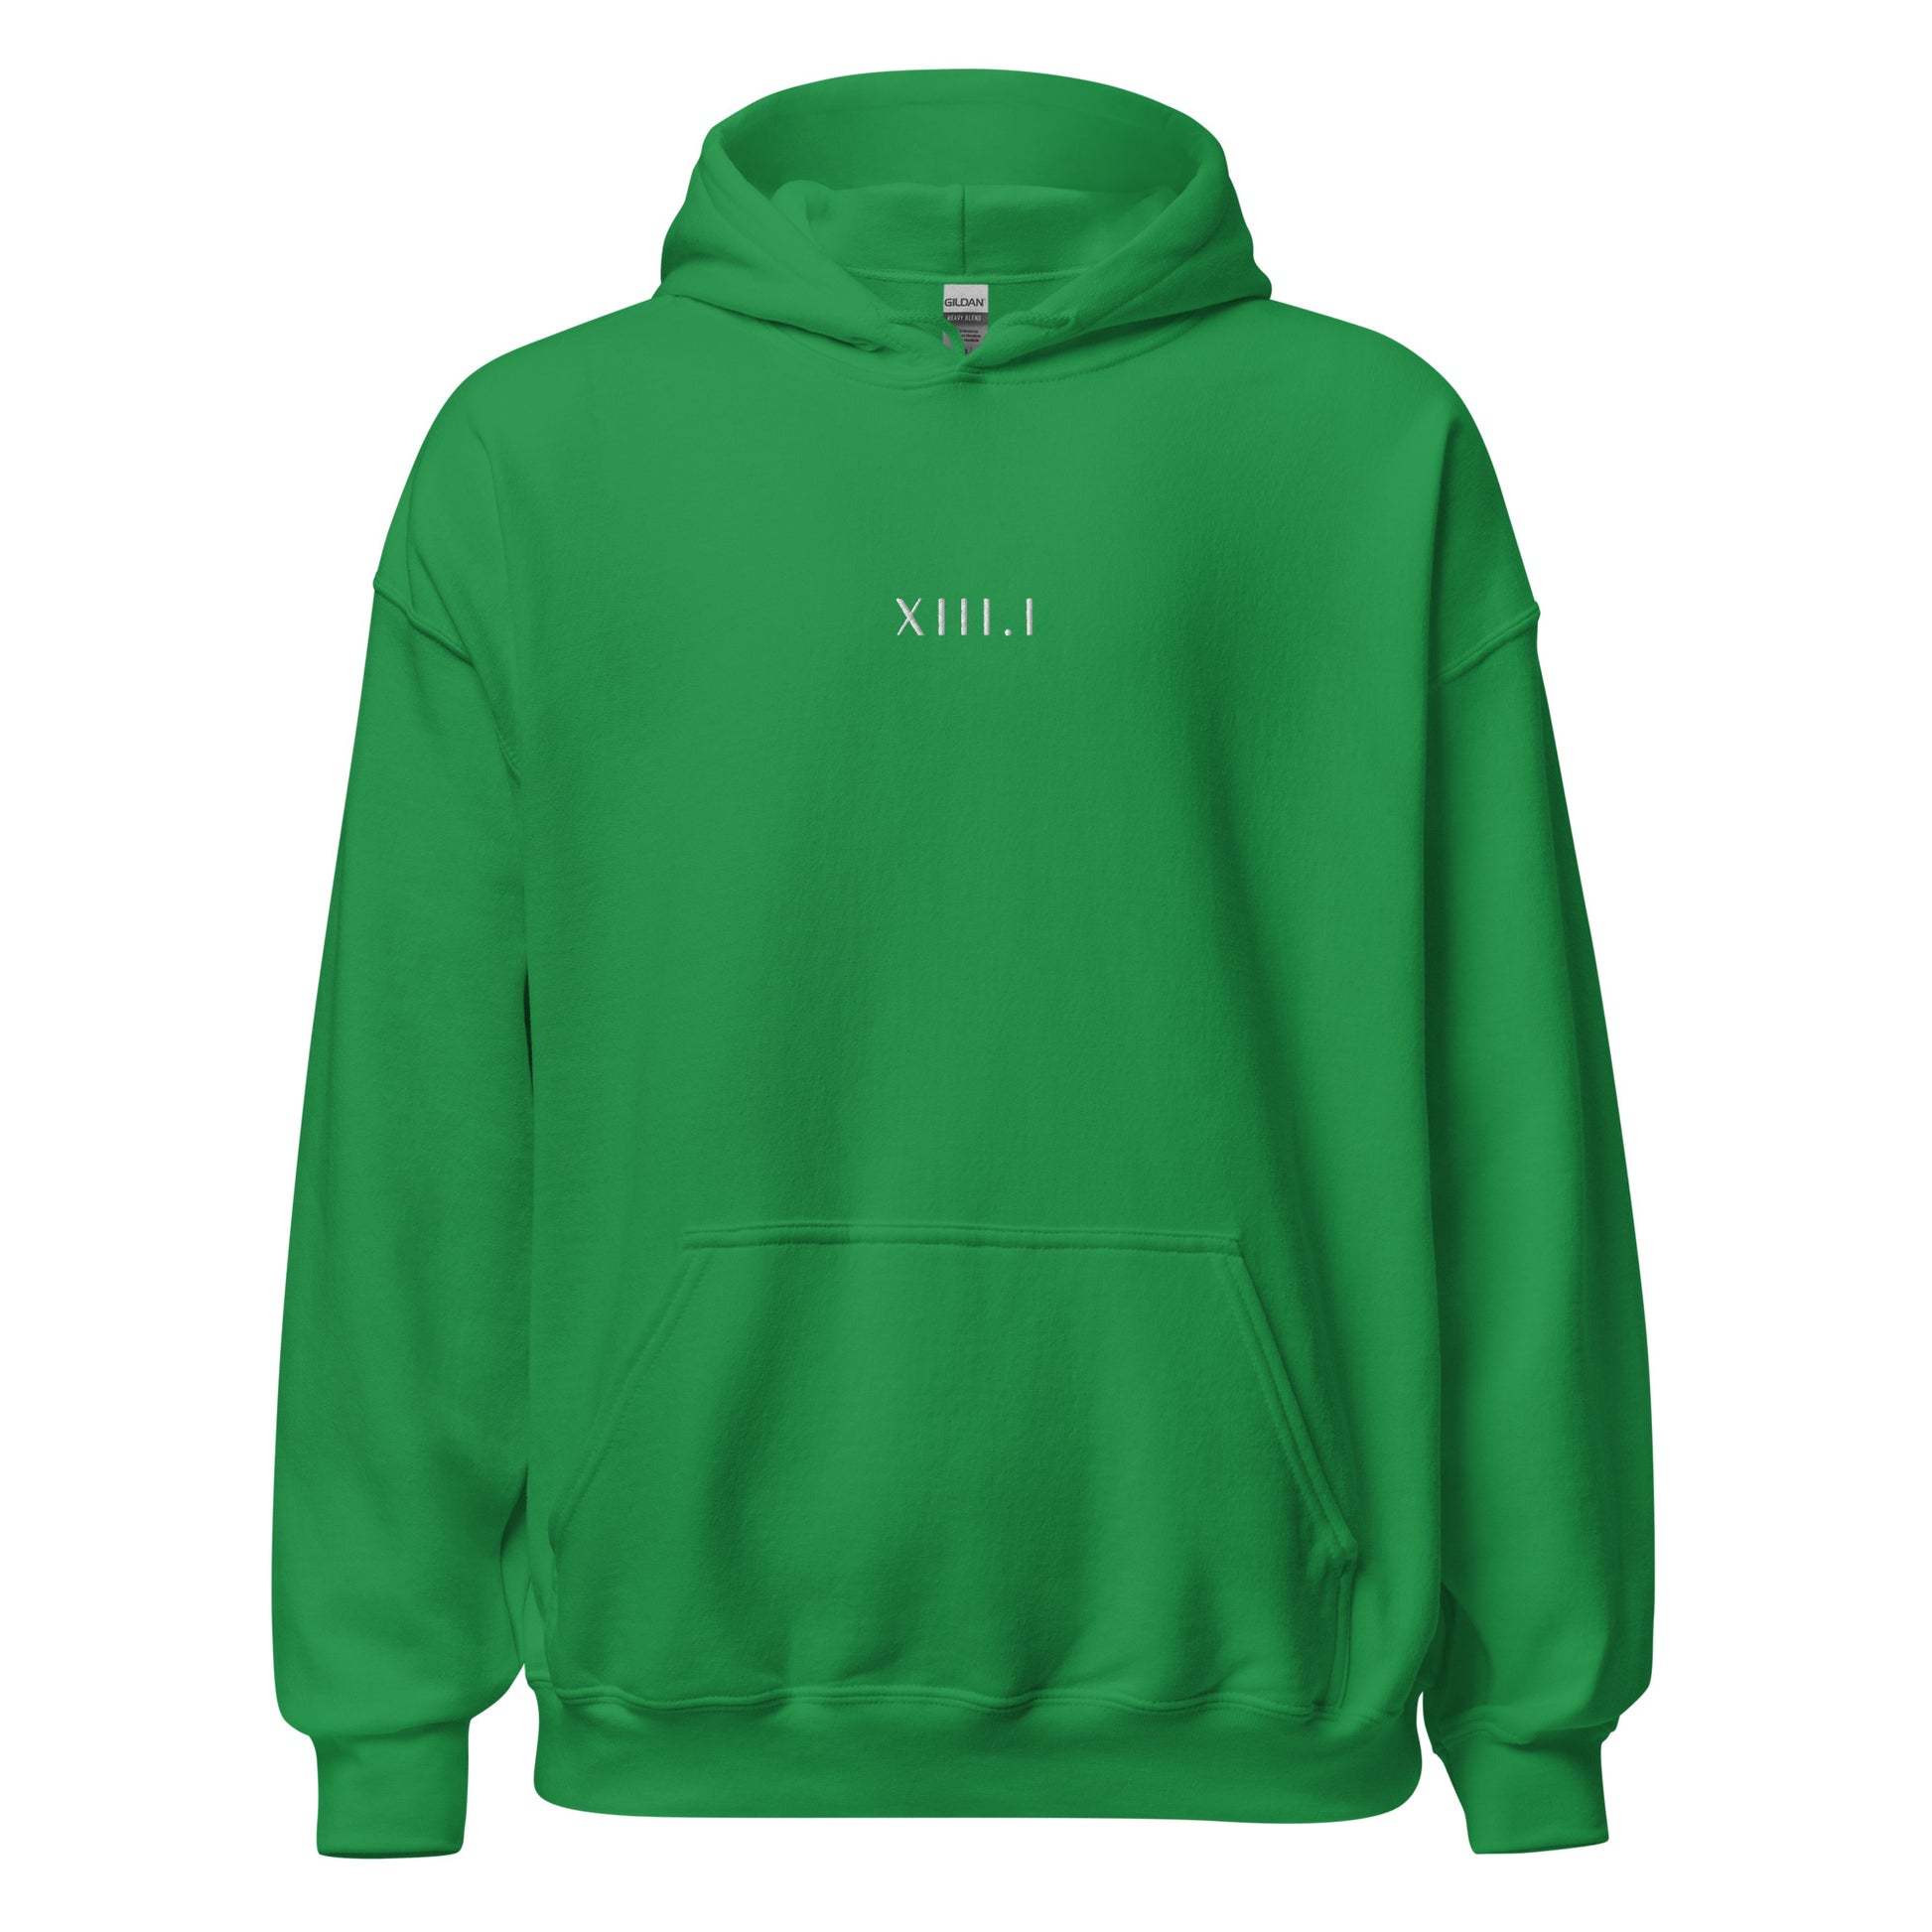 green unisex hoodie with XIII.I 13.1 half marathon in roman numerals embroidered in white writing